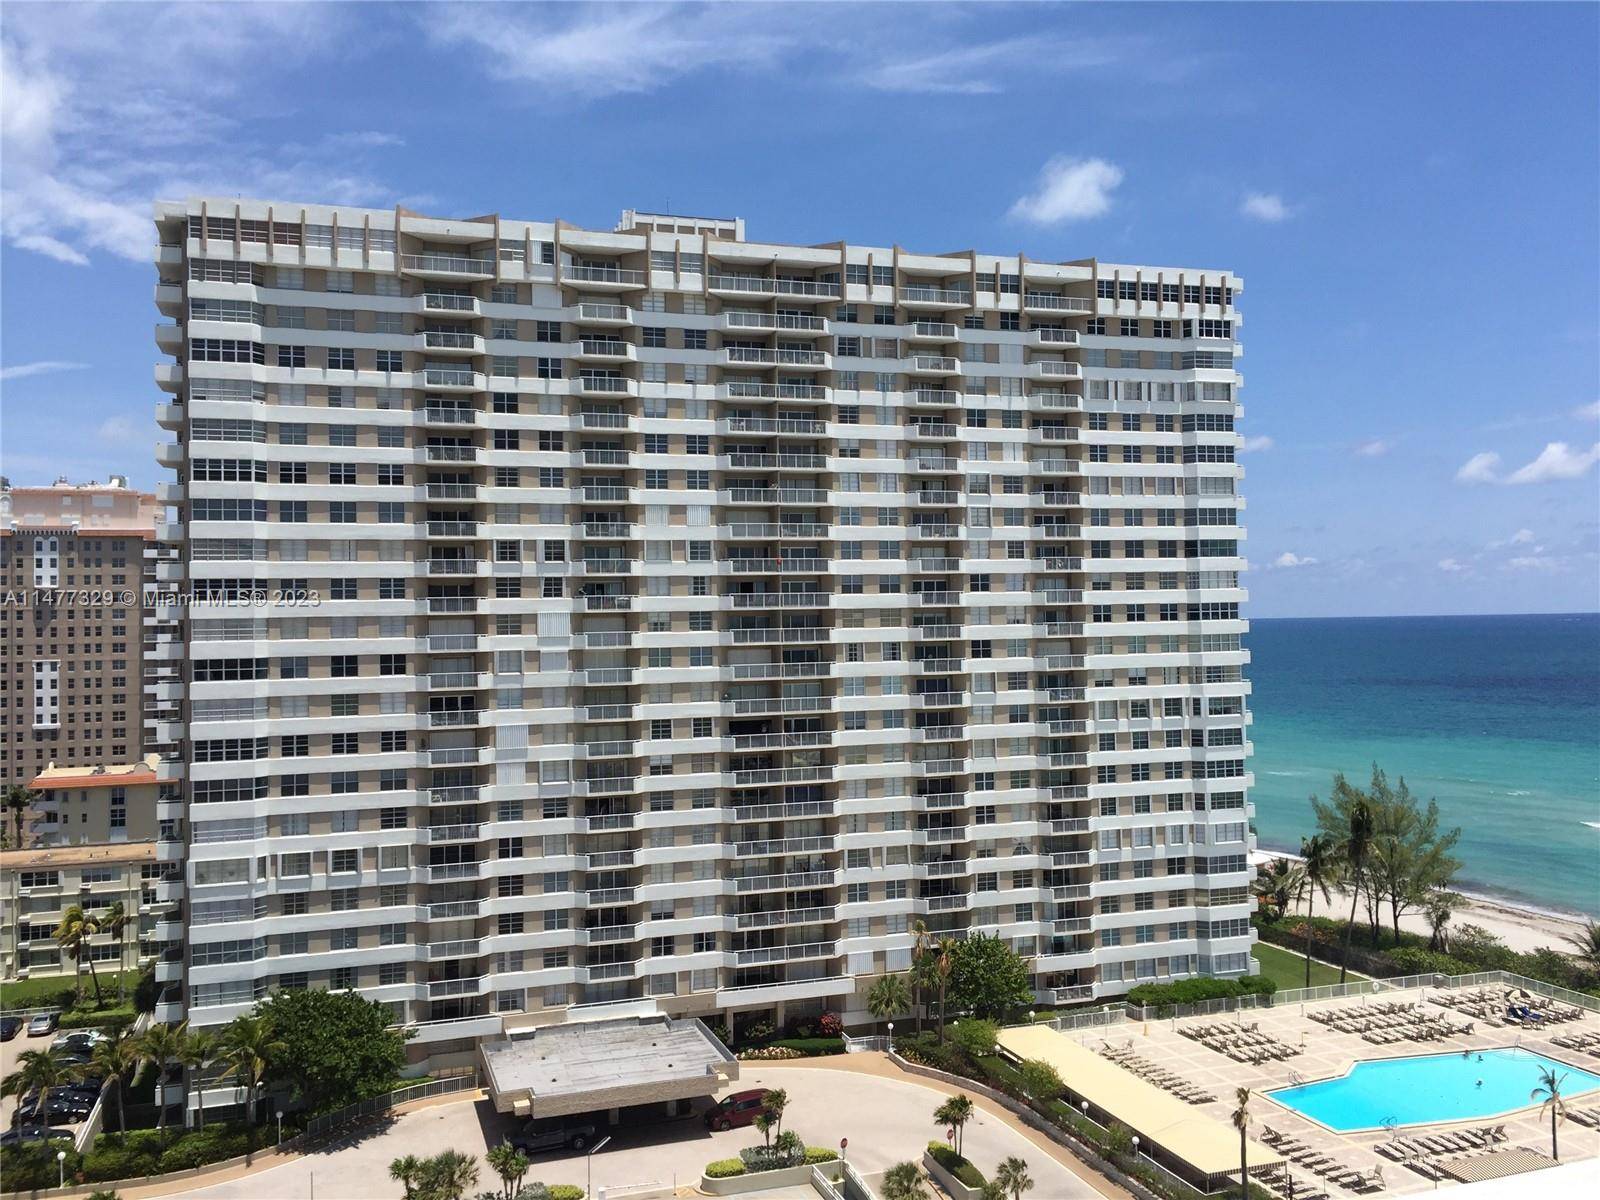 Enjoy life at the Hemispheres one of the best High Rise buildings in Hallandale with great amenities including the beach and marina.